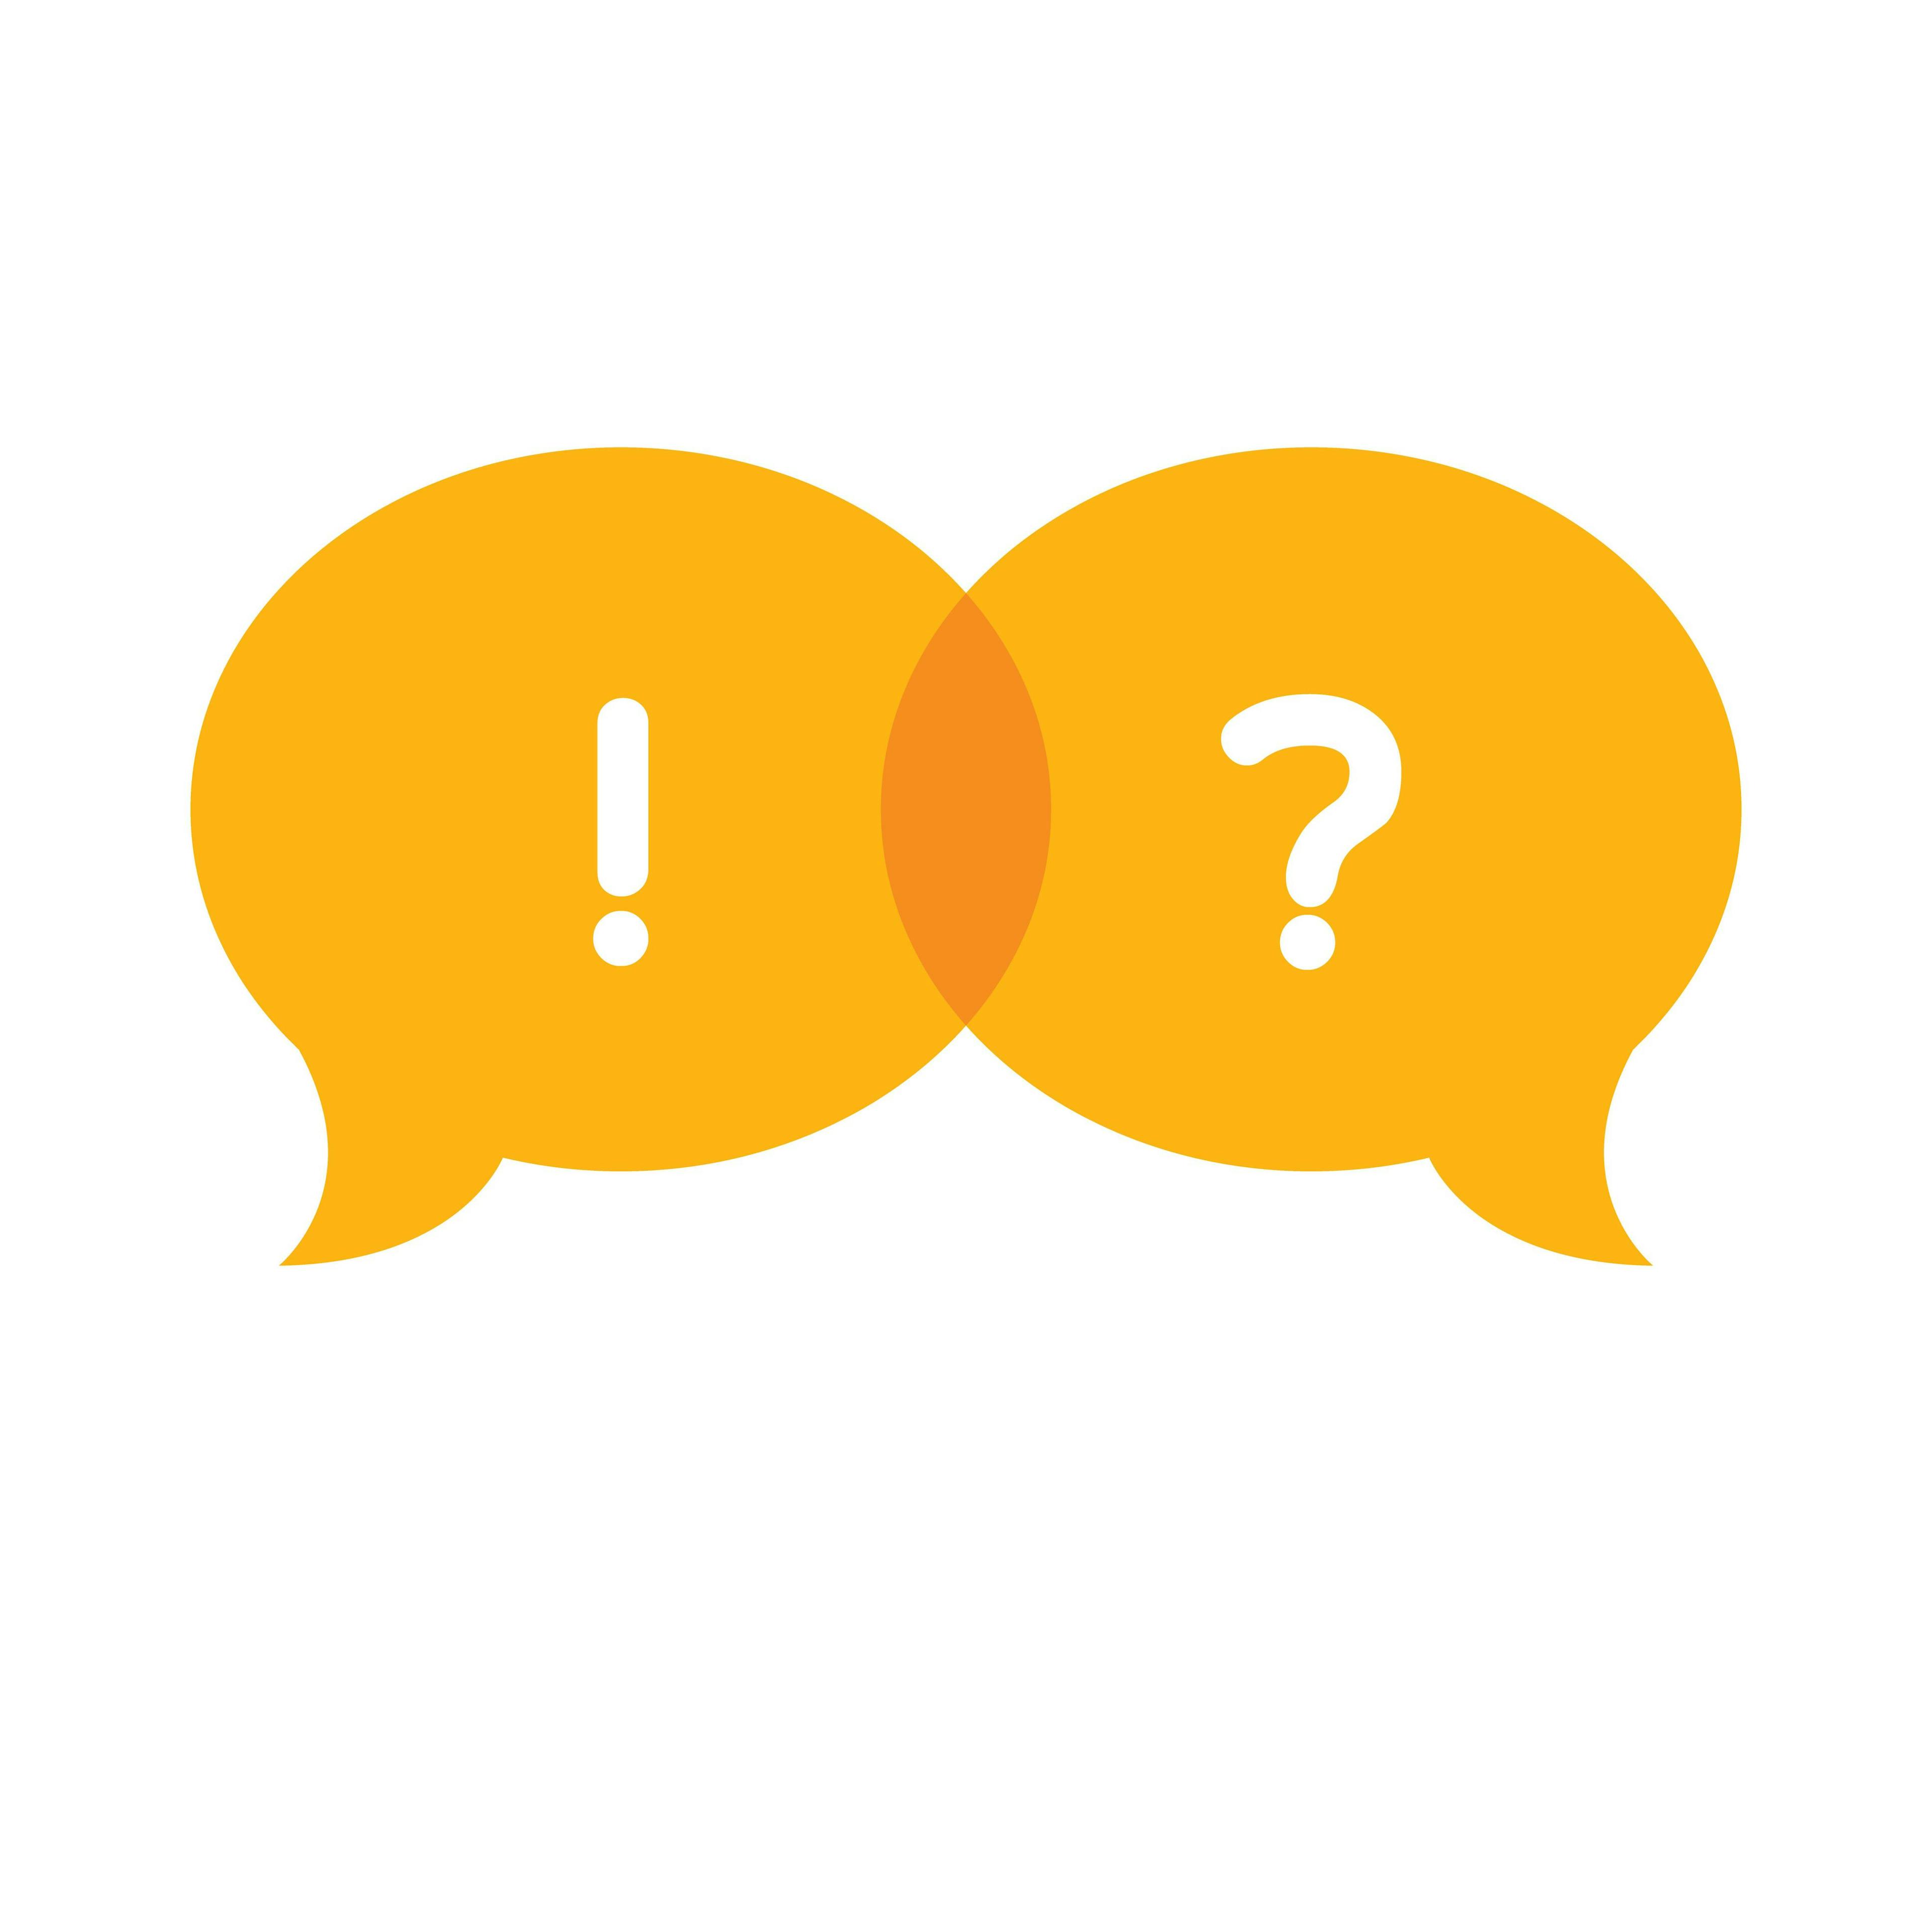 Two yellow speech bubbles: one with an exclamation point, one with a question mark